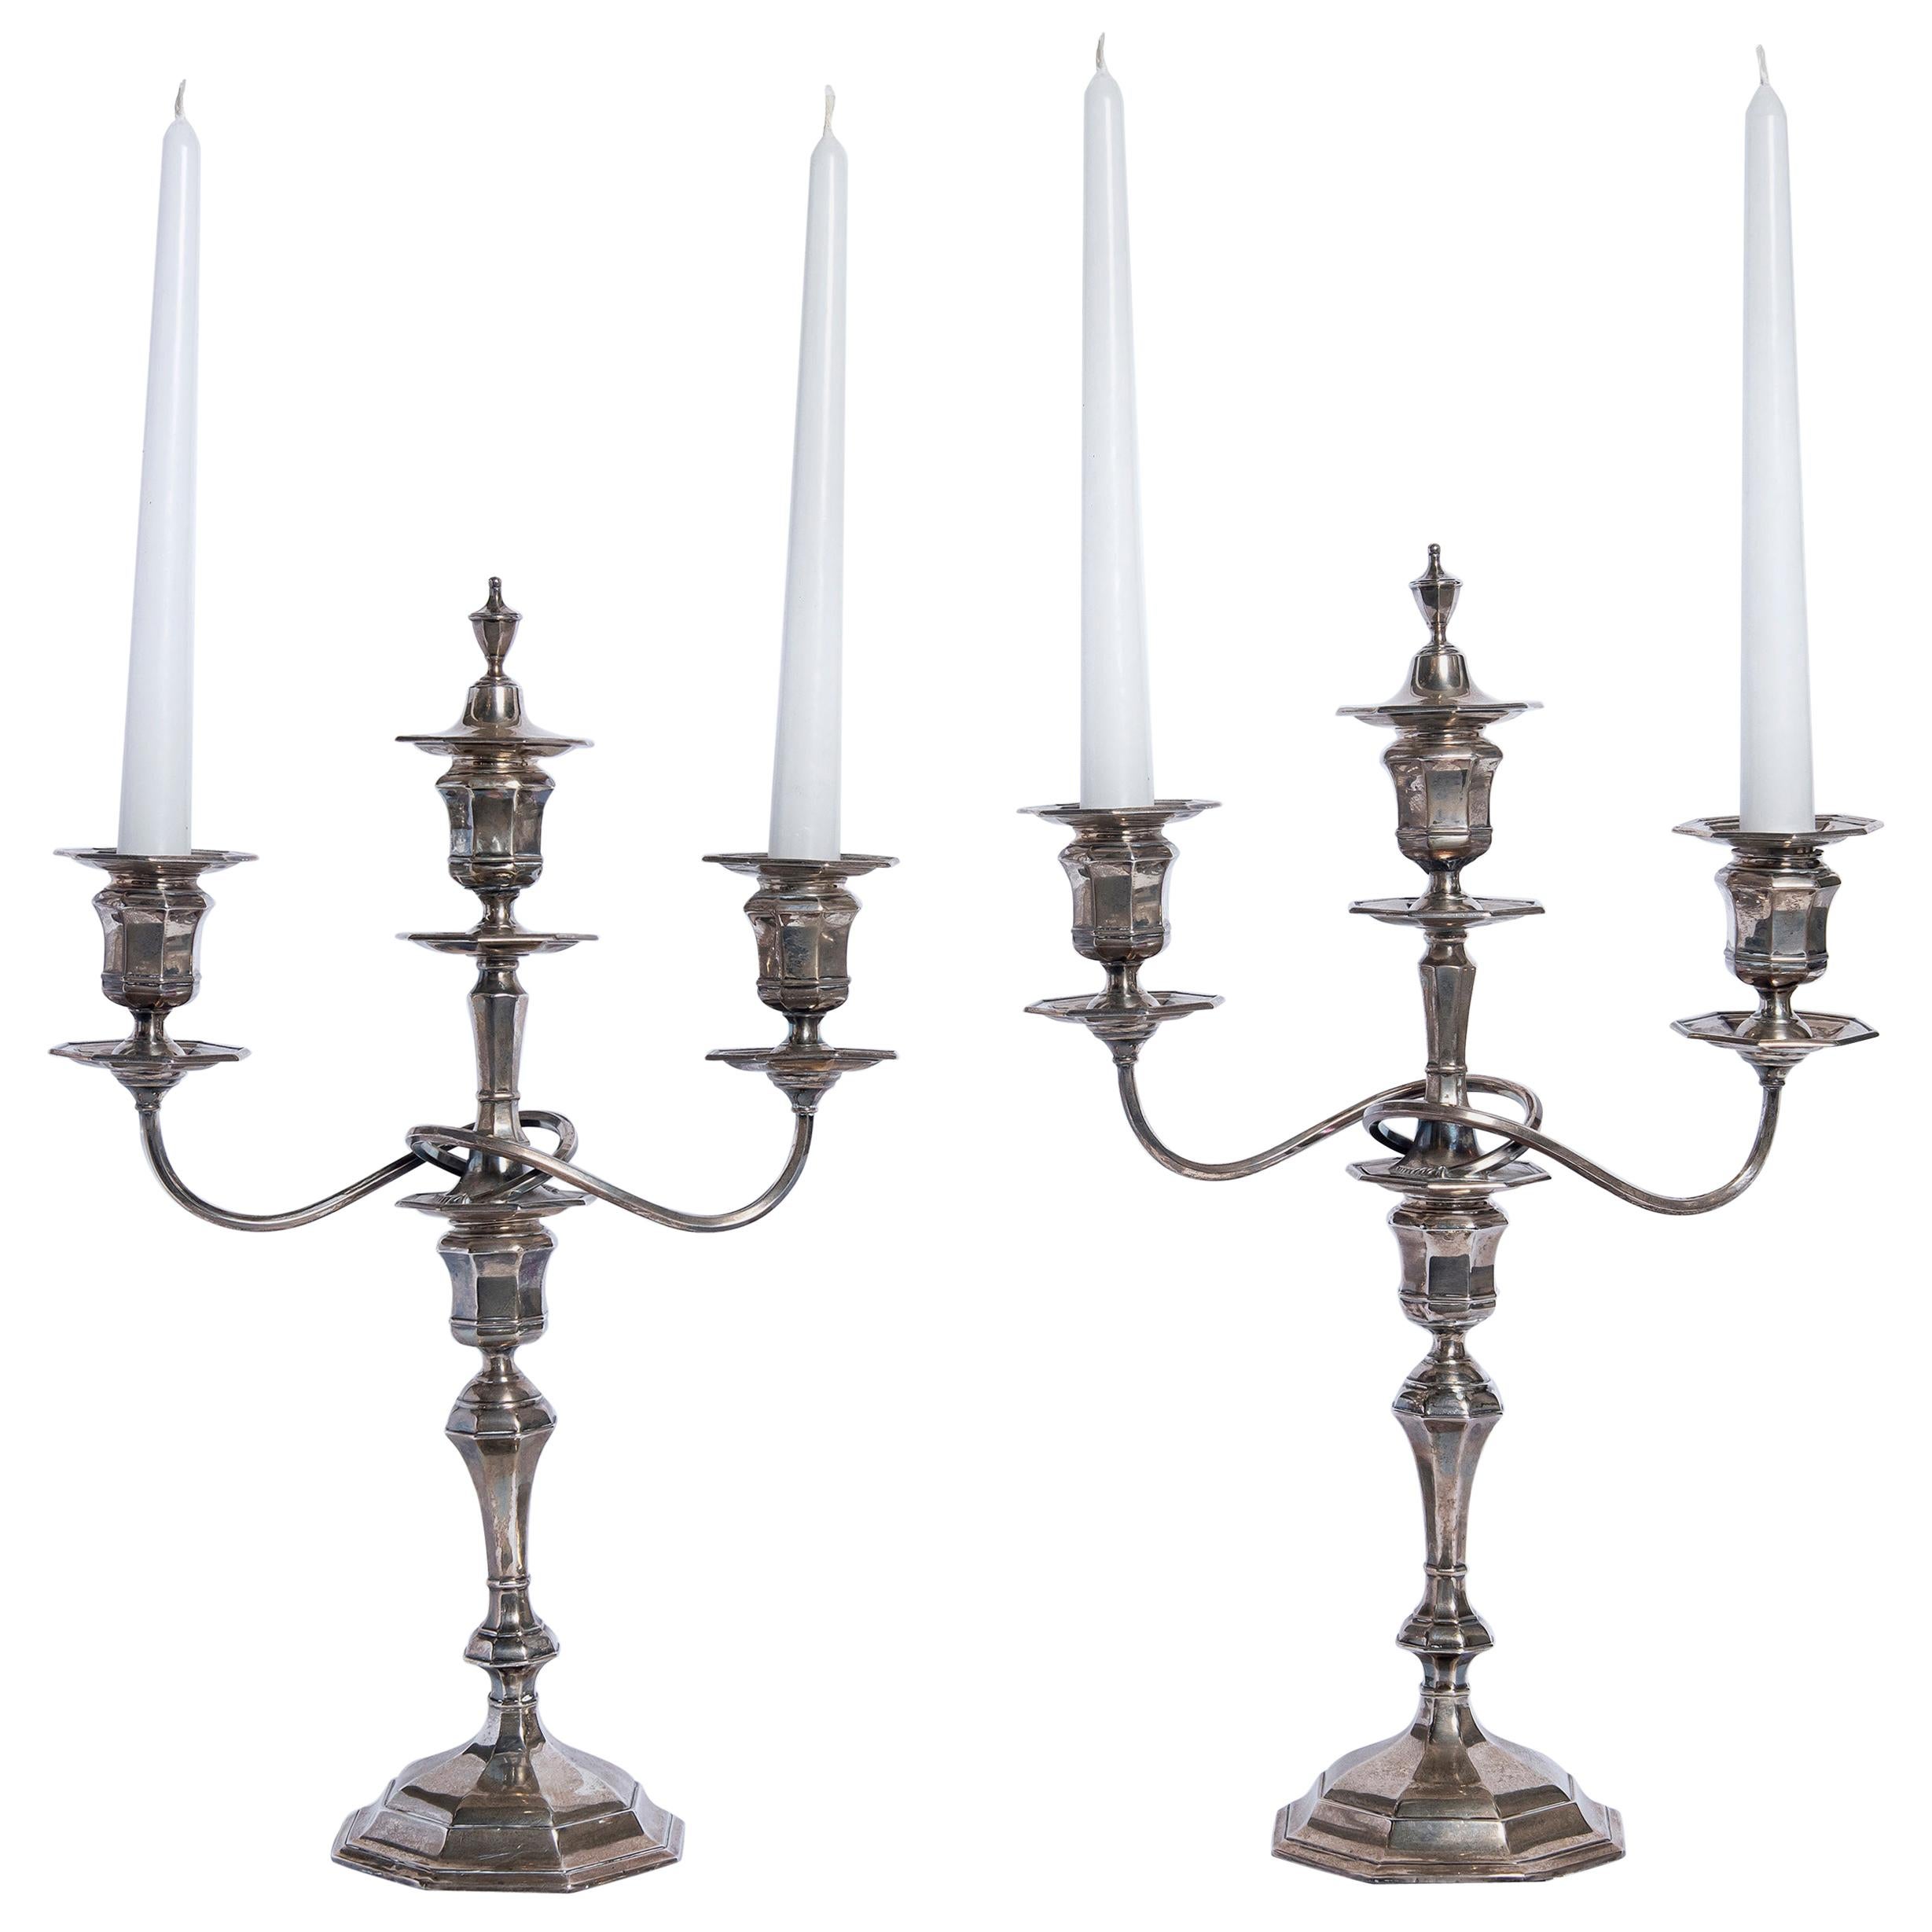 Pair of Silver Candelabras Sealed William Hutton & Sons Ltd., England, 1920 For Sale